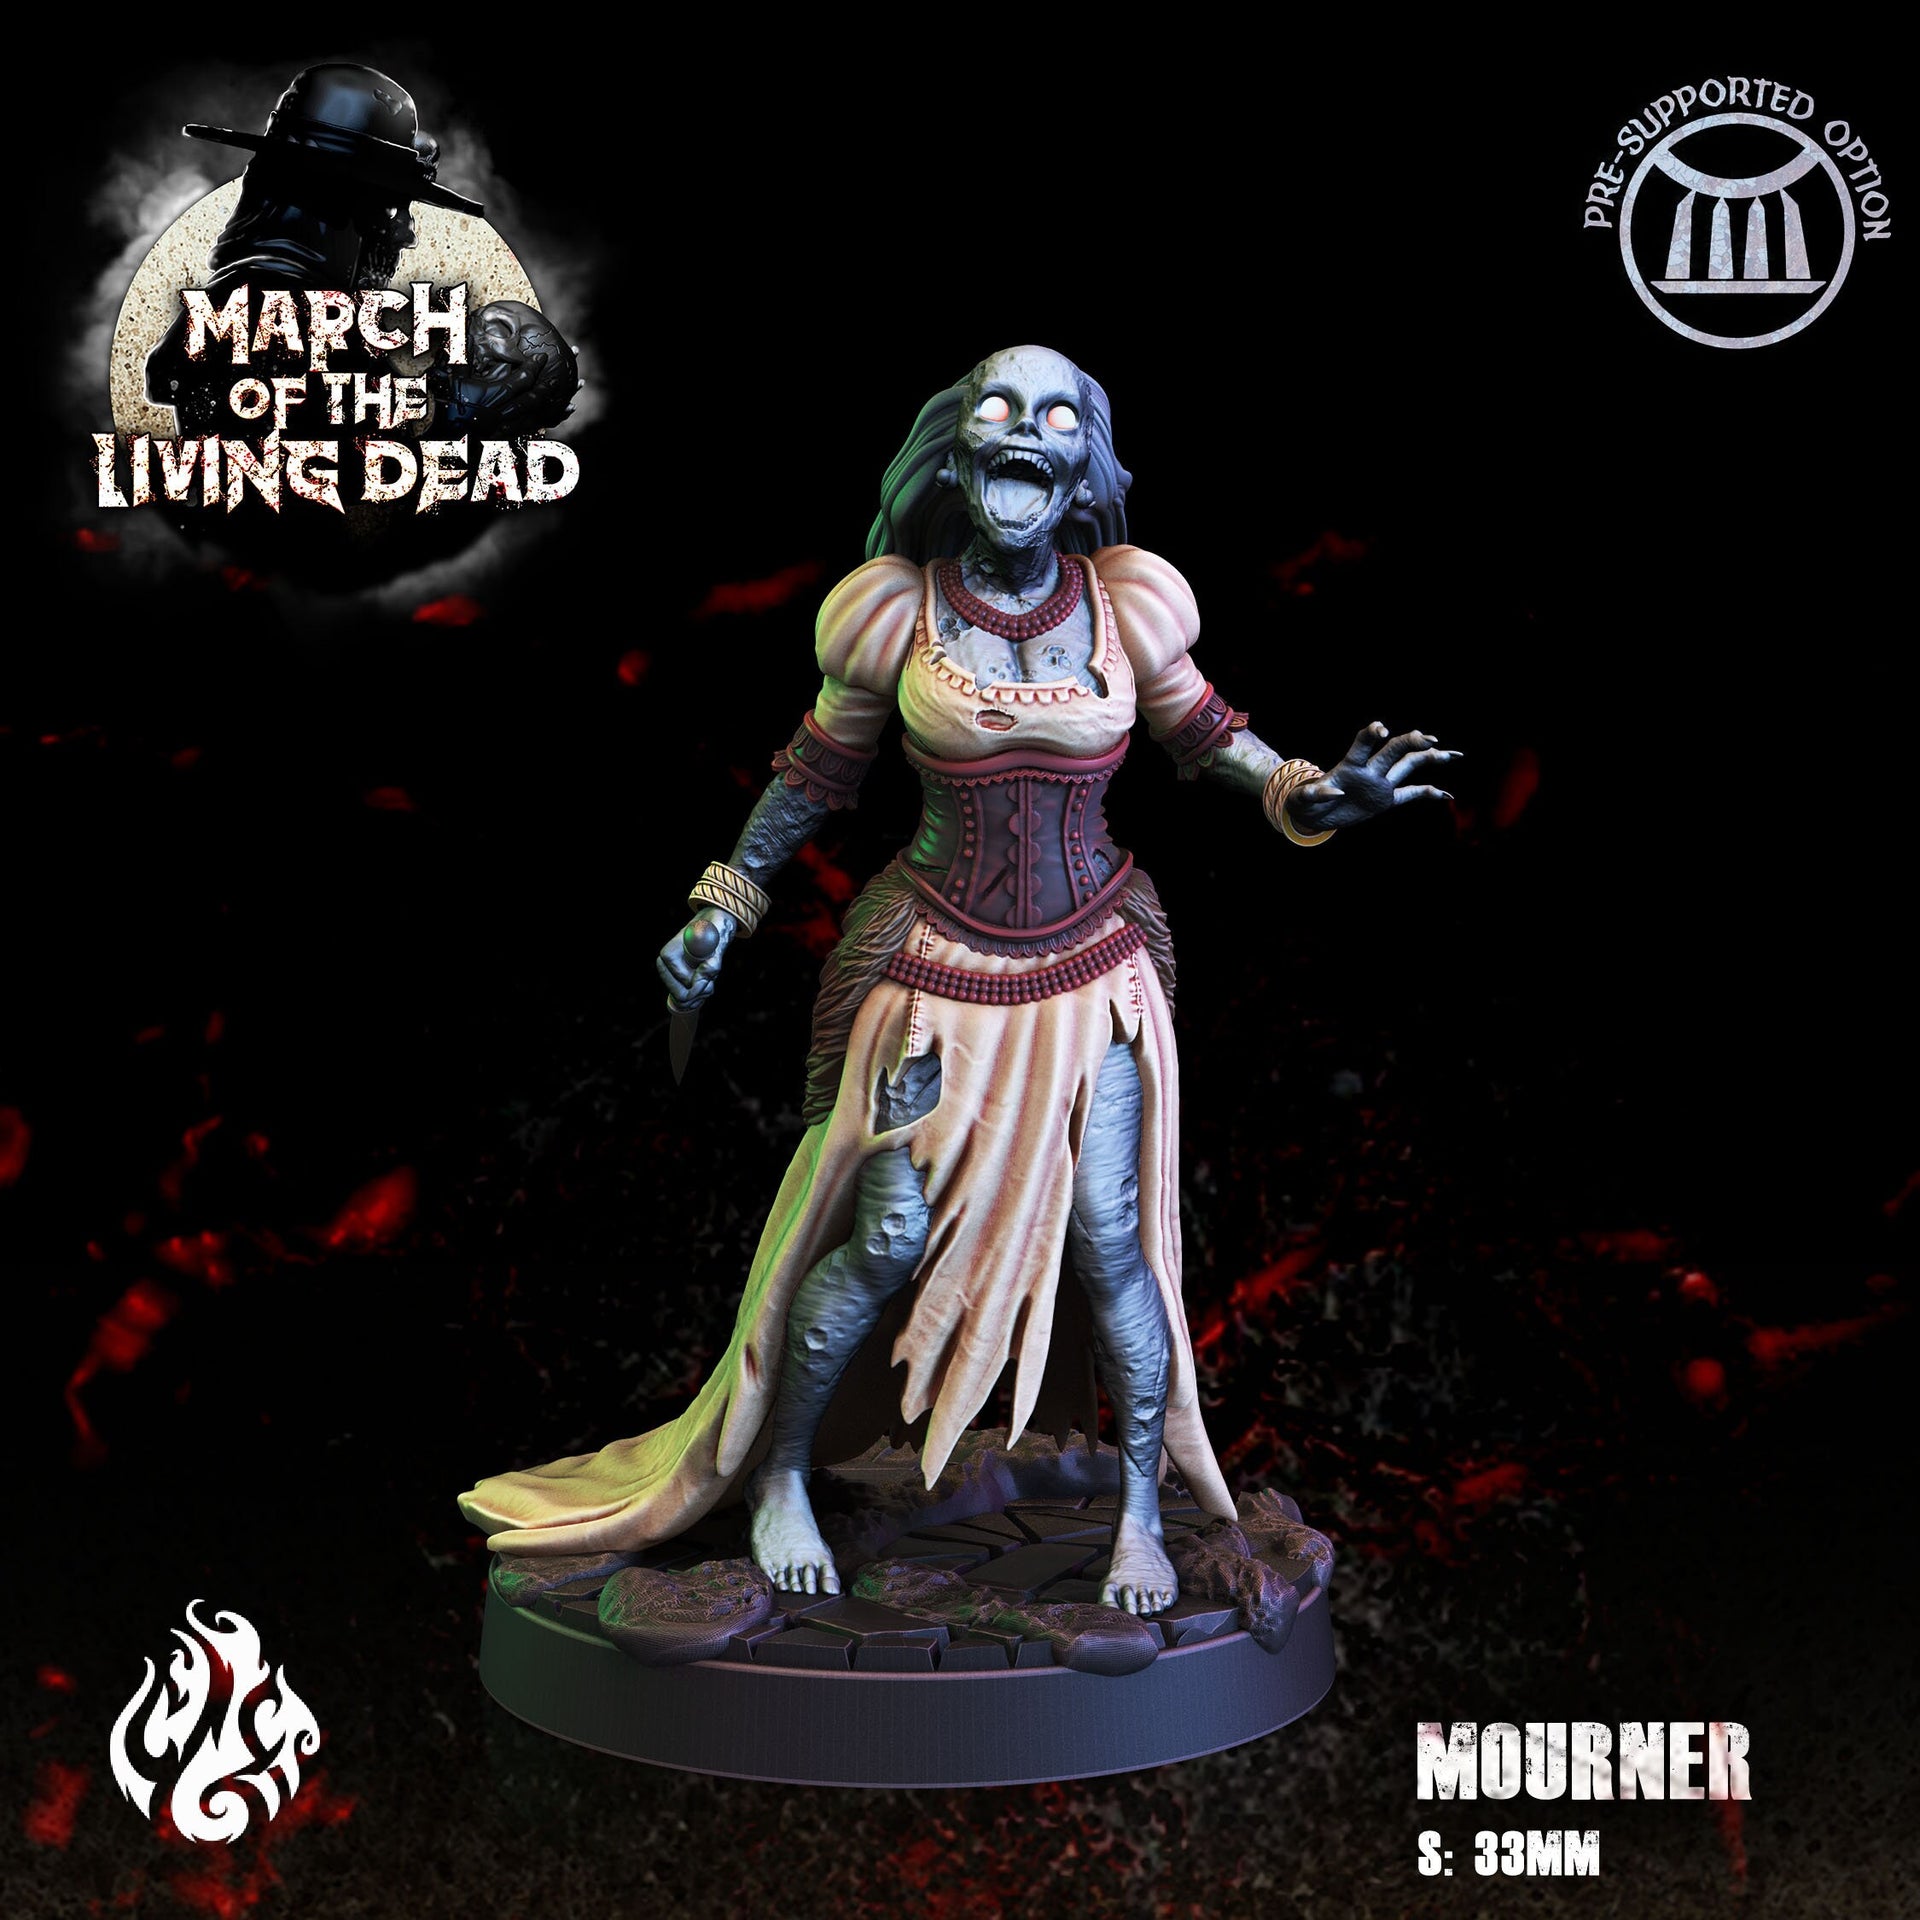 The Mourner - Crippled God Foundry - March of the Living Dead 